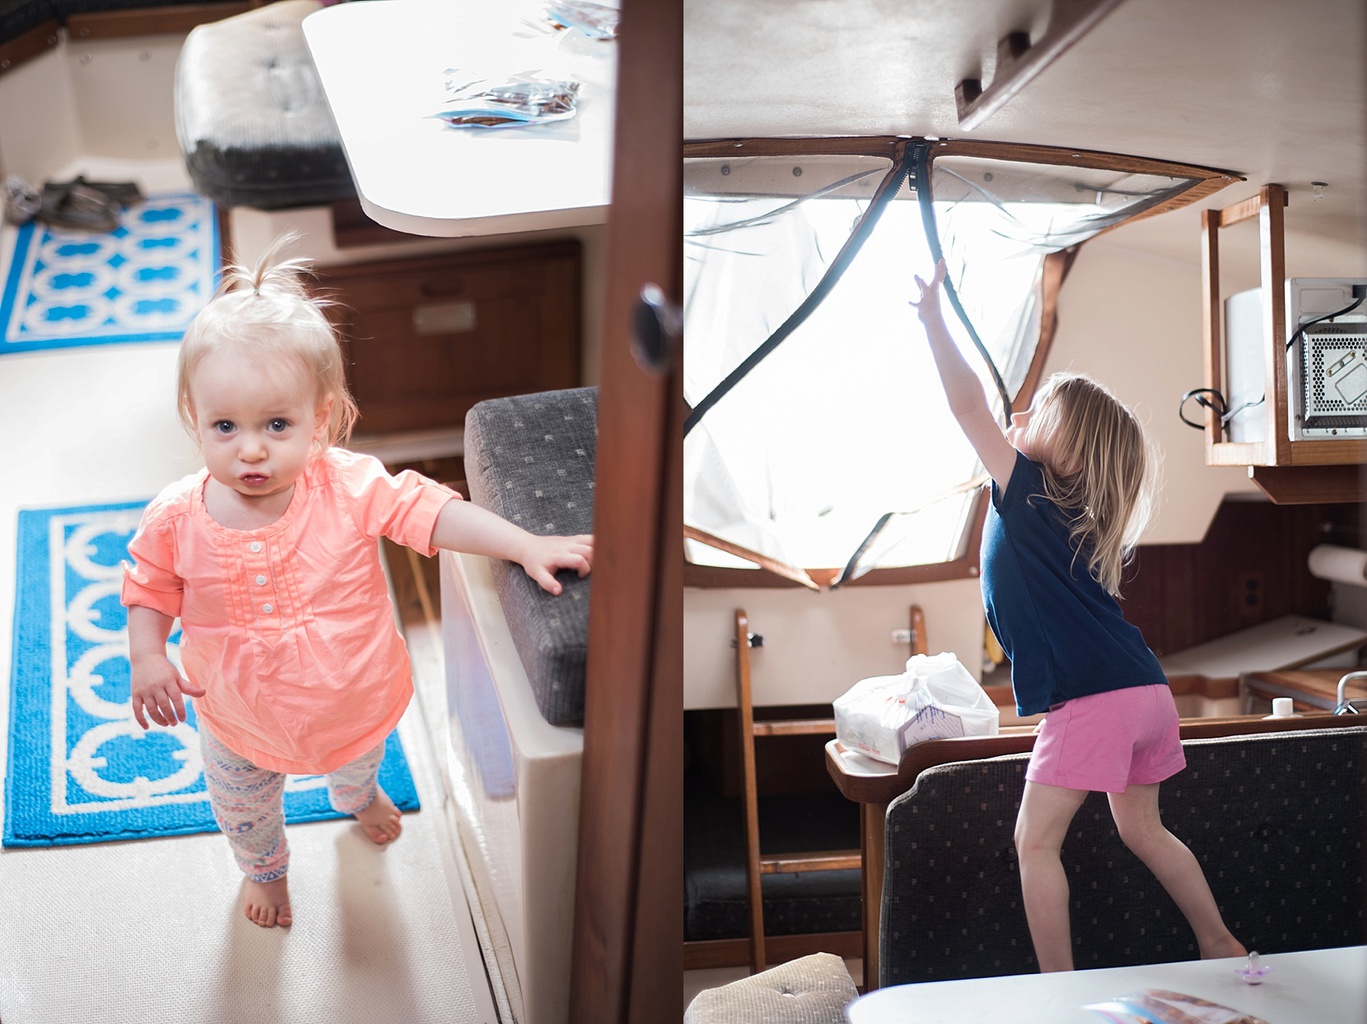 Michigan wedding and lifestyle photographer, Allie Siarto, shares a photo of her young daughters in the cabin of a Catalina 30 sailboat